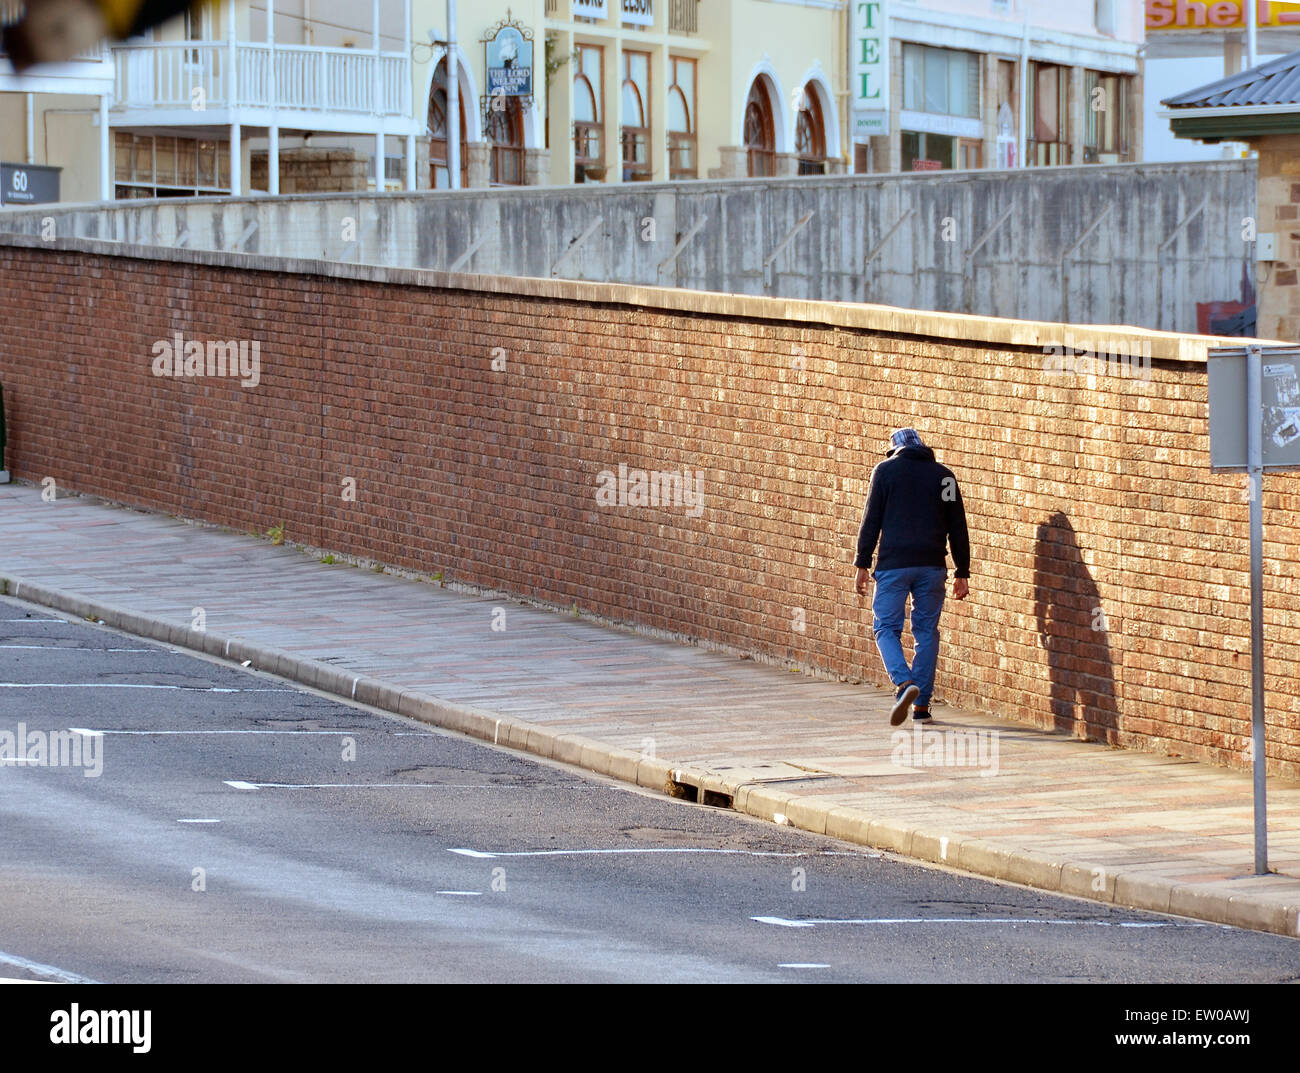 Man walking along a pavement next to a brick wall in a patch of sunlight Stock Photo